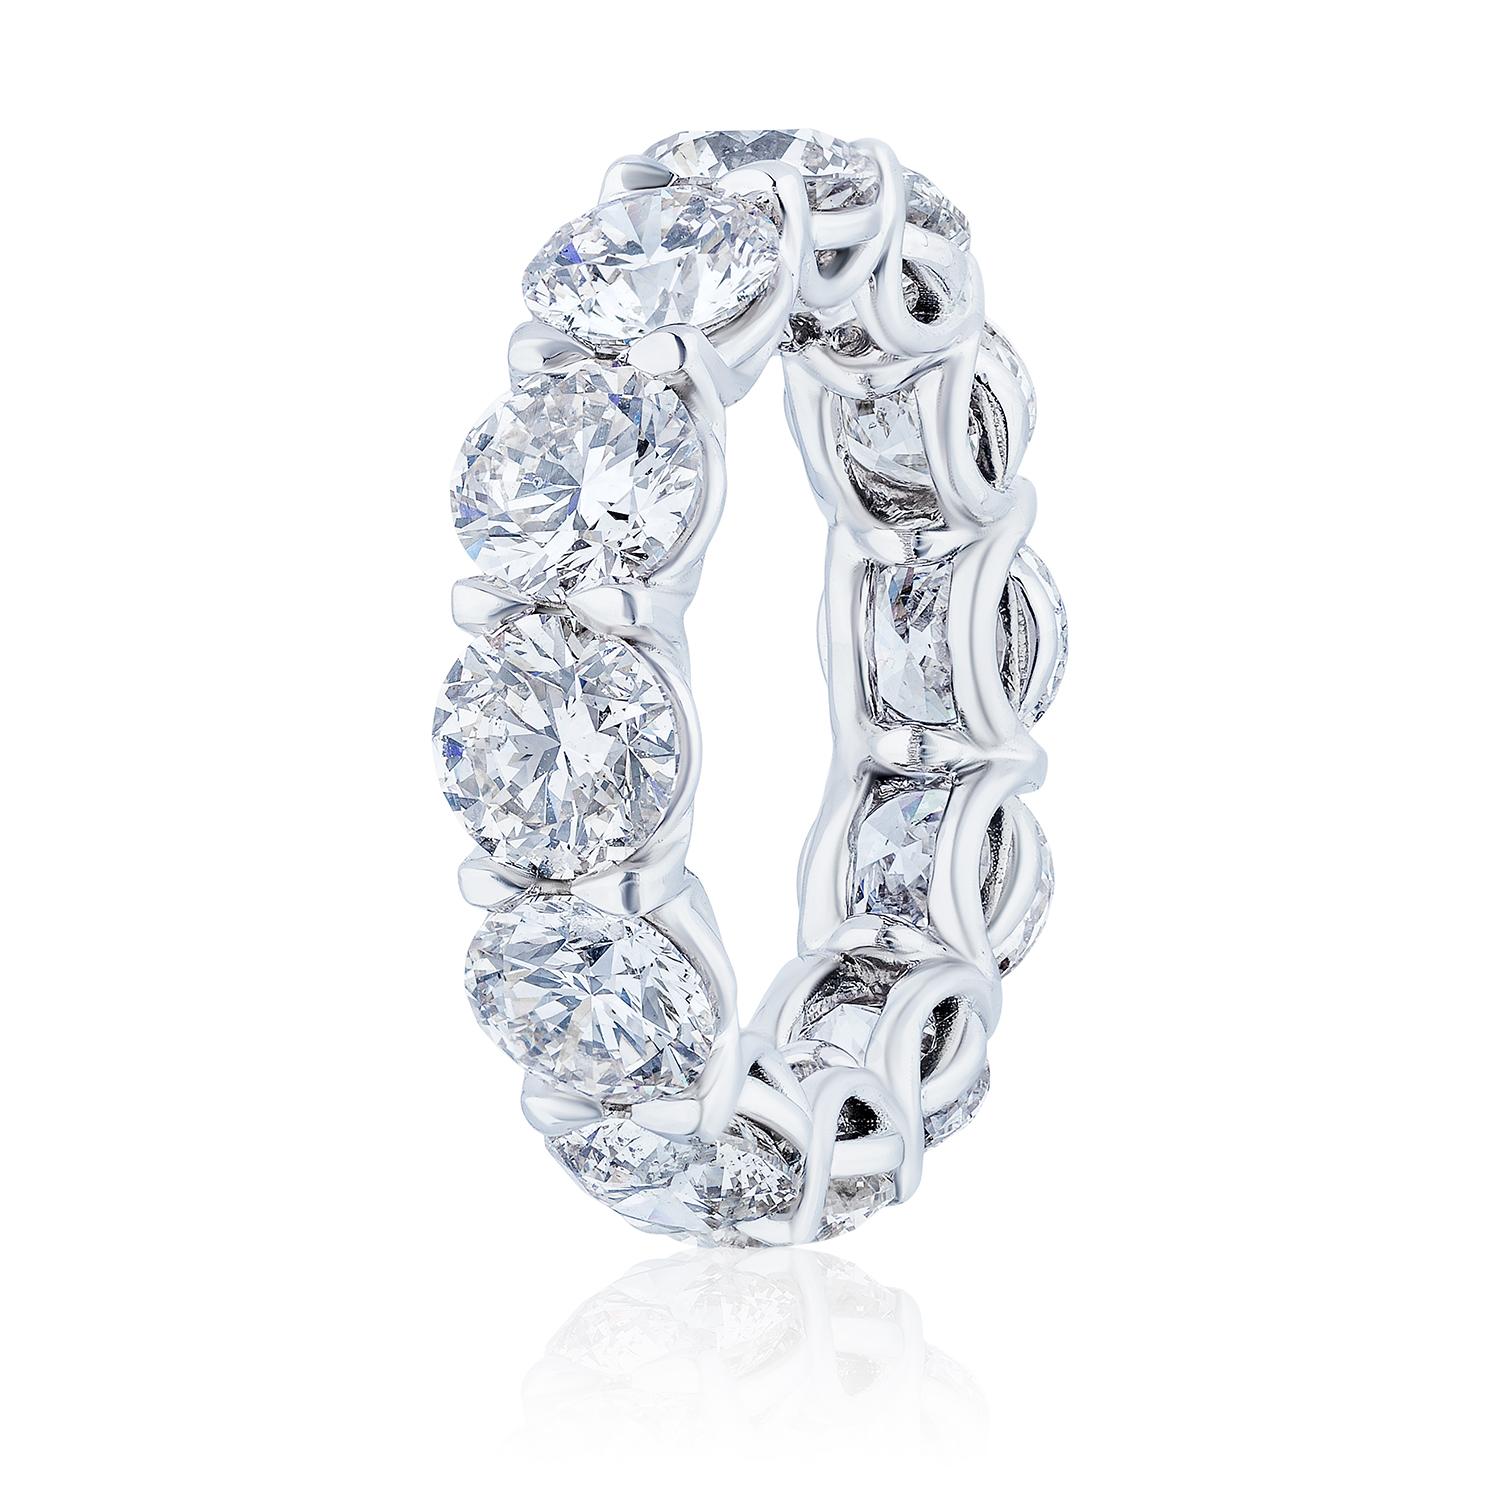 This beautiful Eternity Ring is set with 12 perfectly matched Round Brilliant Cut Diamonds, each weighing between 0.7ct to 0.72ct totaling 8.50 Carats. Made in New York City using Platinum 950. Fits US Size 6.25

Diamonds are of H-I color and VS-SI